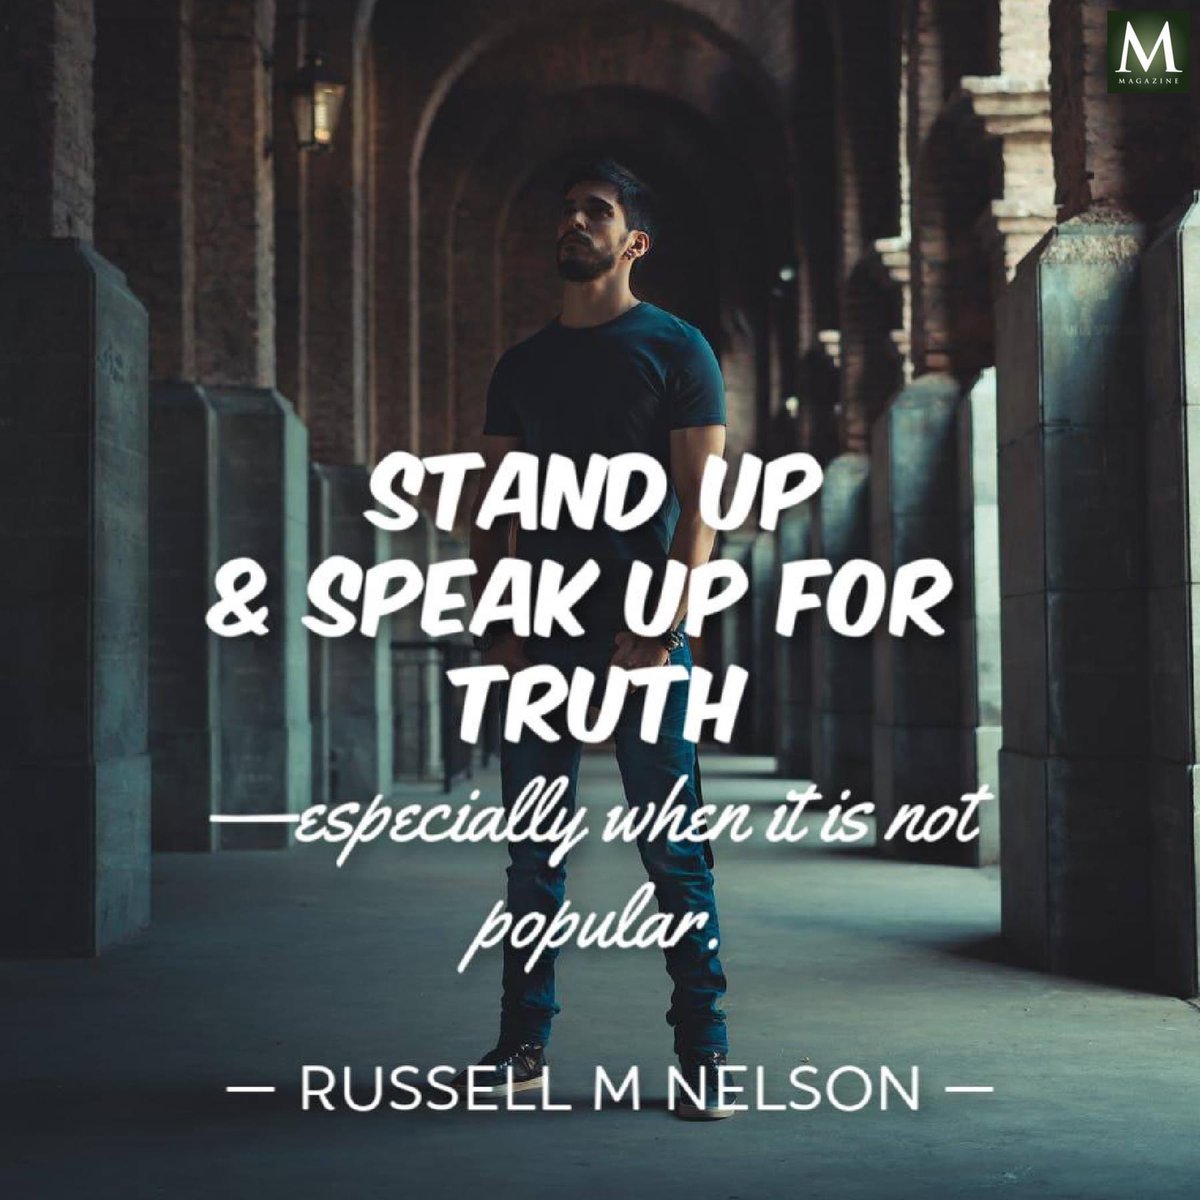 “Stand up and speak up for truth—especially when it is not popular.” ~ President Russell M. Nelson 

#TrustGod #CountOnHim #HisDay #BestDay #HearHim #ComeUntoChrist #ShareGoodness #ChildrenOfGod #GodLovesYou #TheChurchOfJesusChristOfLatterDaySaints